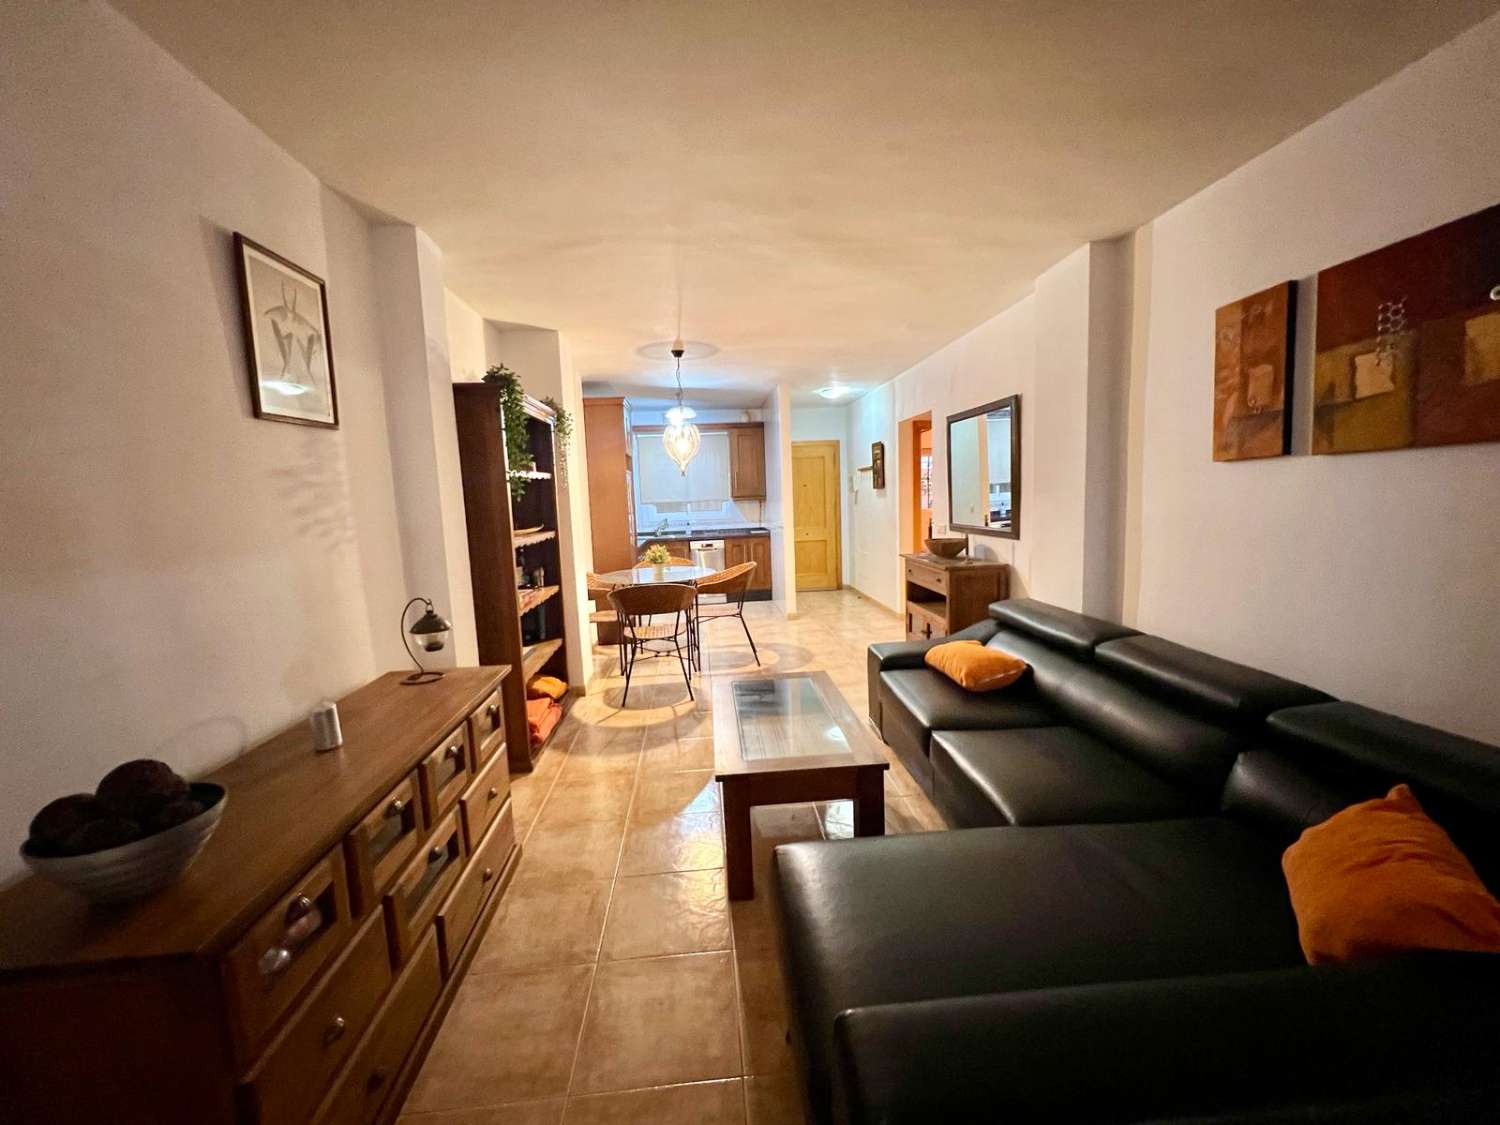 ONE BED APARTMENT NEAR CARABEO AND PARADOR